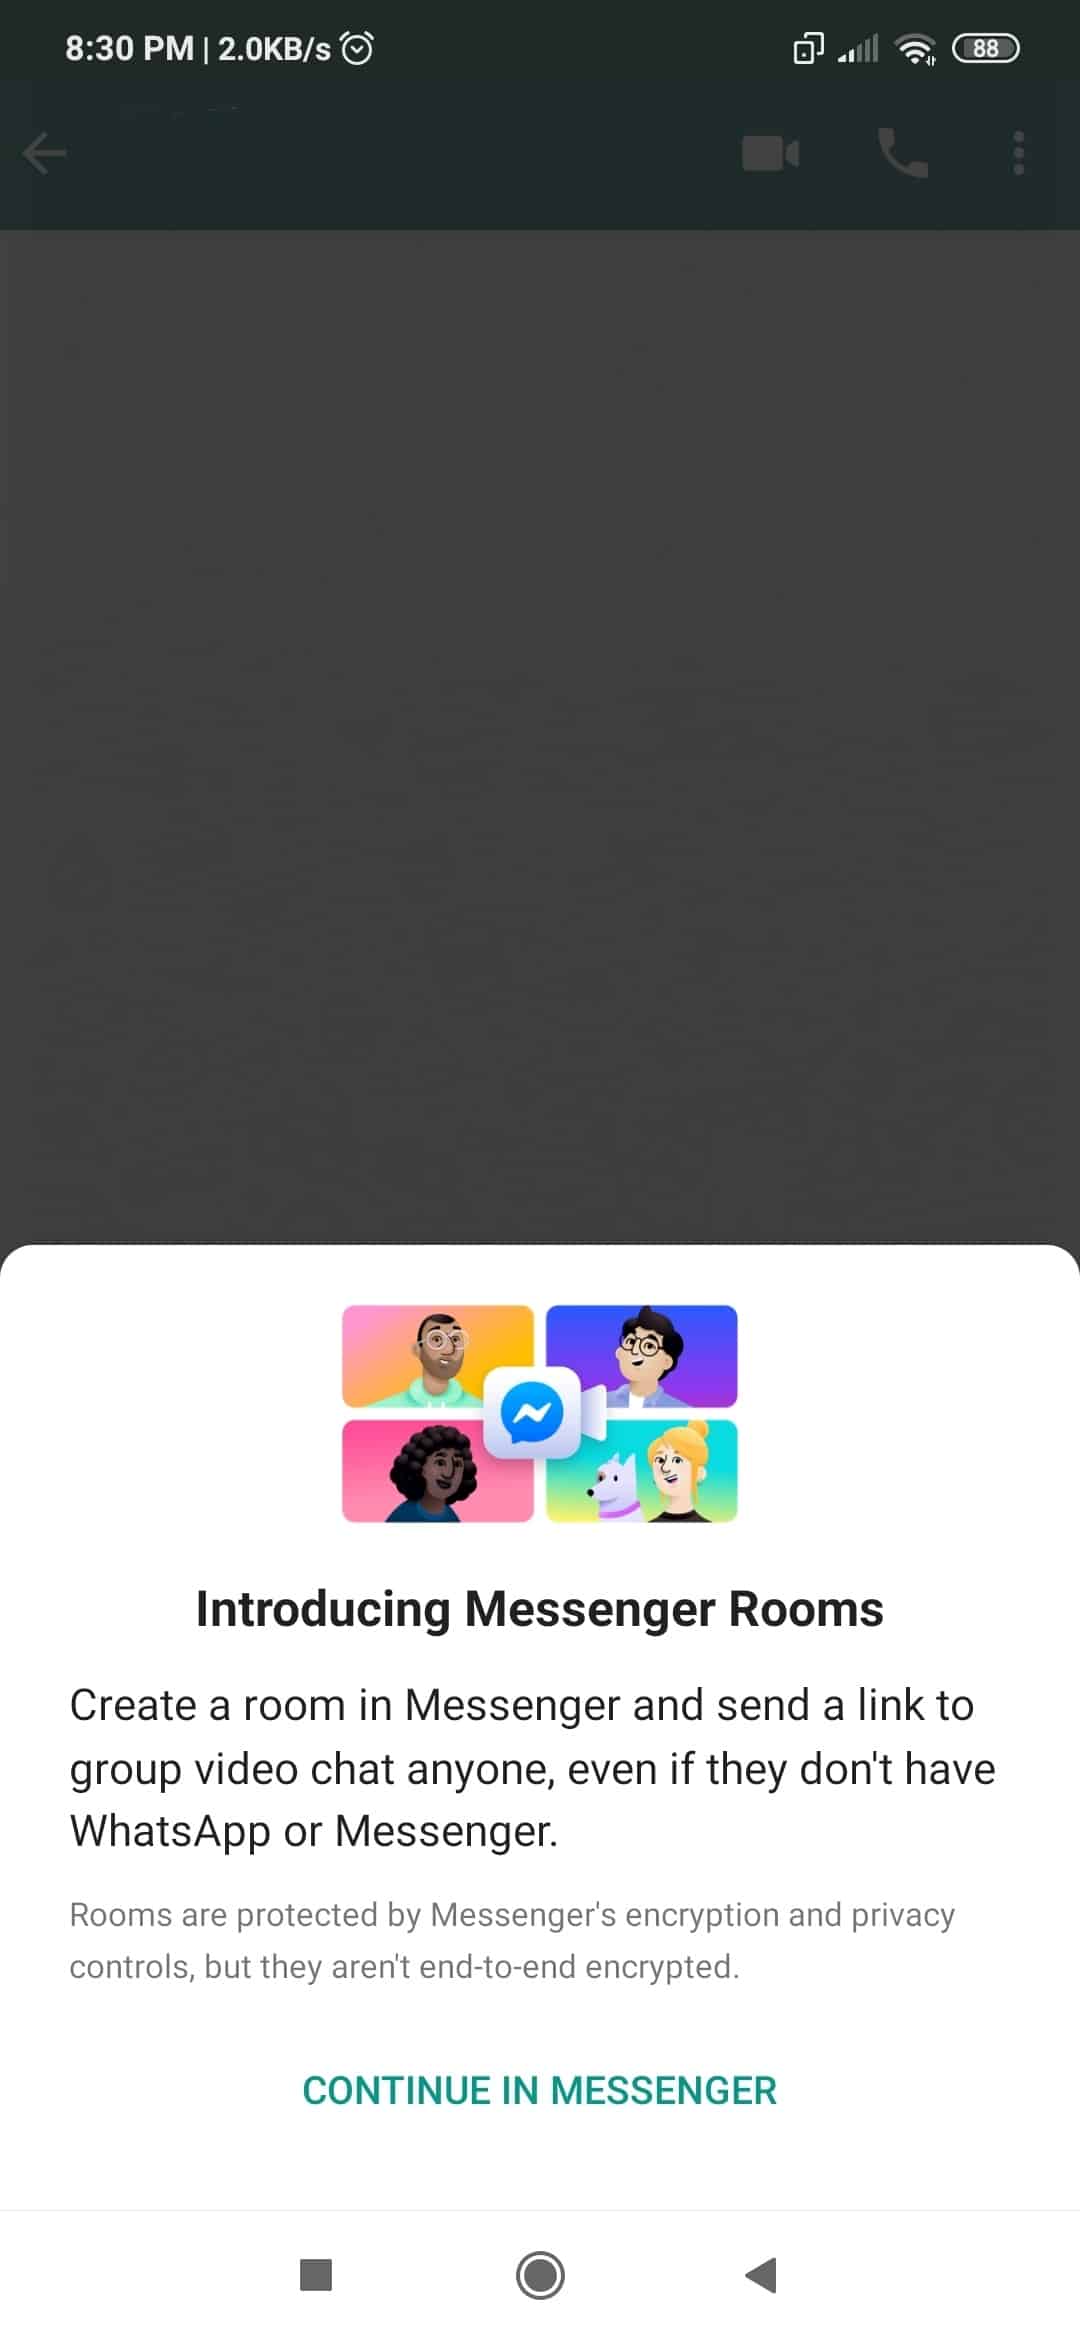 IMG 20200818 203948 WhatsApp rolls out new 'Messenger Room' support on mobile devices in India